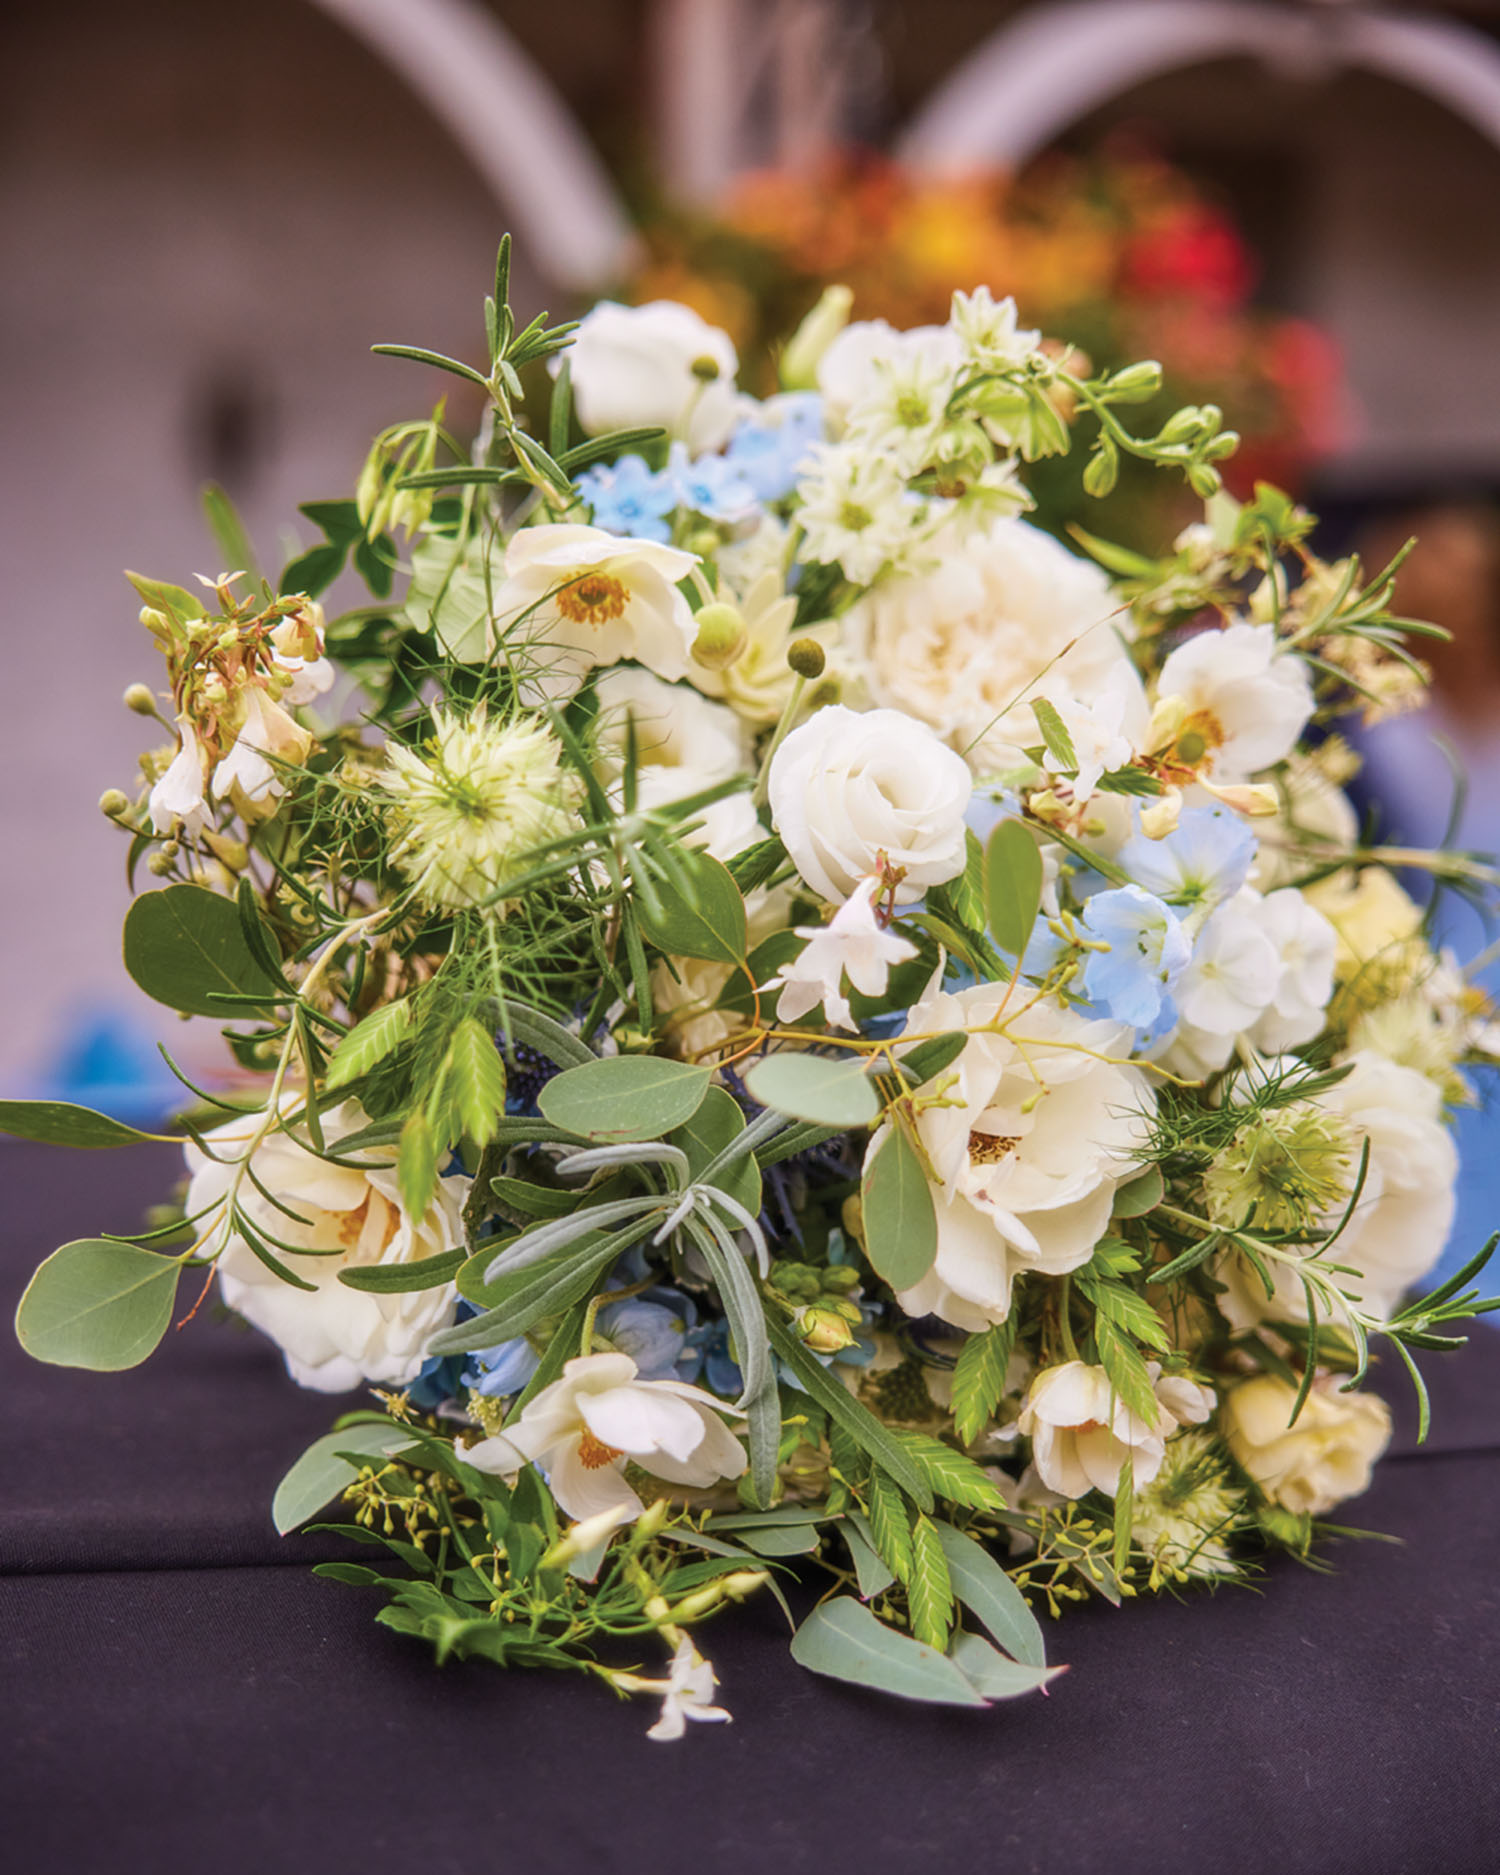 India’s wedding bouquet, created by Pulbrook & Gould, included roses (‘Iceberg,’ ‘Winchester Cathedral,’ and ‘Susan’), phlox, Japanese anemones, rosemary, lavender foliage, tuberose, hydrangeas, lisianthus, love-in-a-mist, eucalyptus, abelia, and clematis.